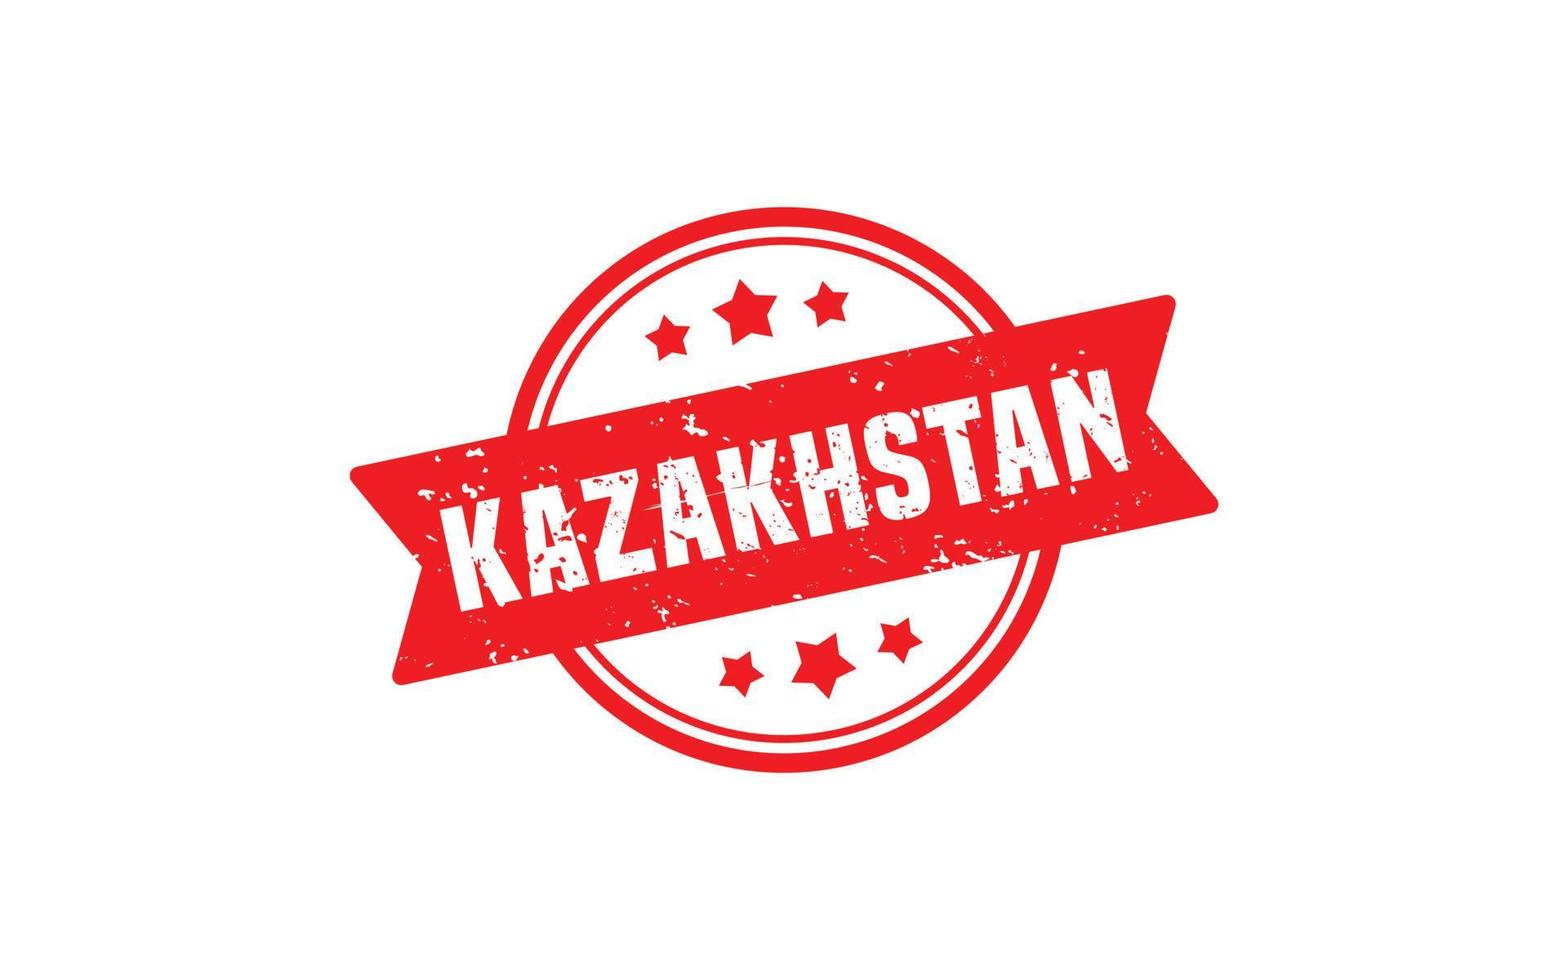 KAZAKHSTAN stamp rubber with grunge style on white background vector